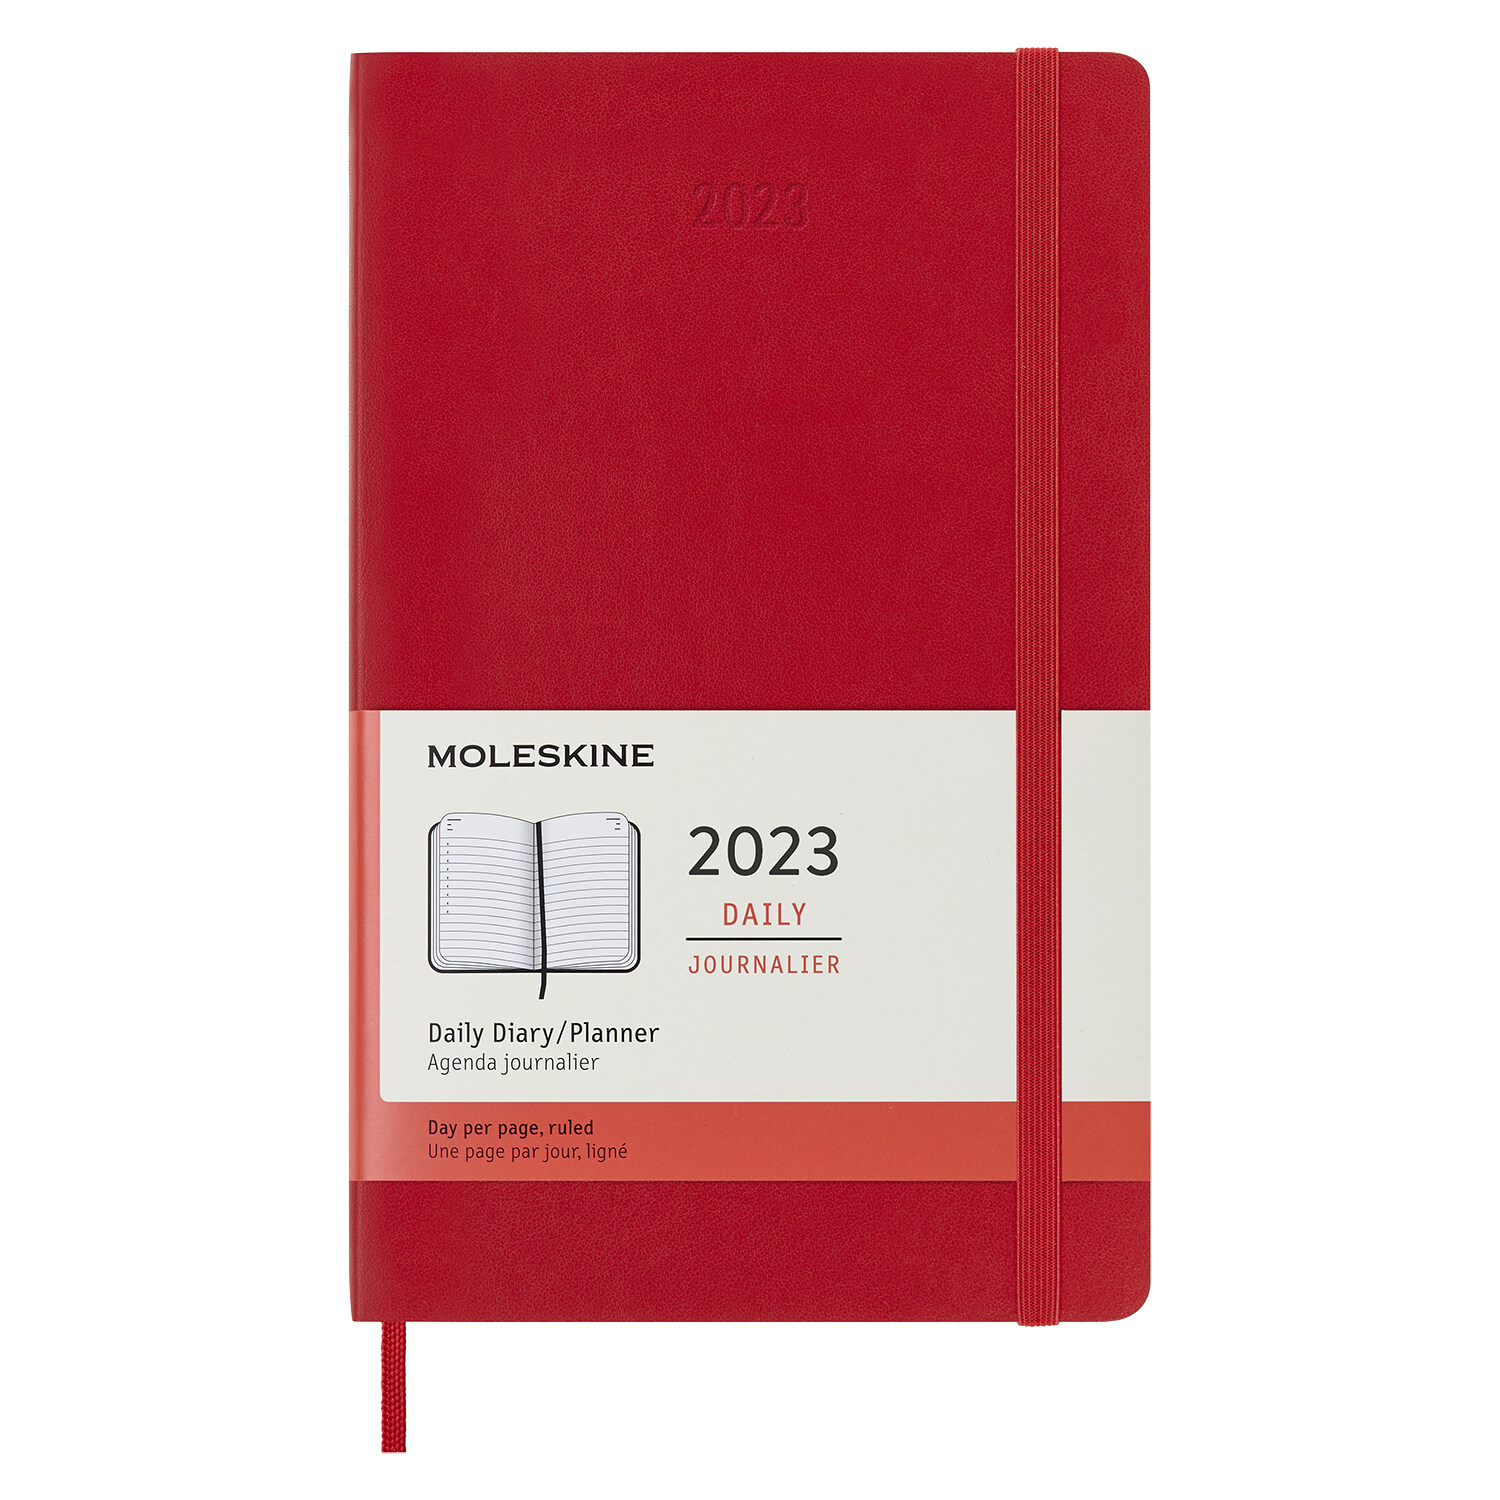 Moleskine 2023 Daily Planner, 12m, Large, Scarlet Red, Soft Cover (5 X 8.25) (Other)